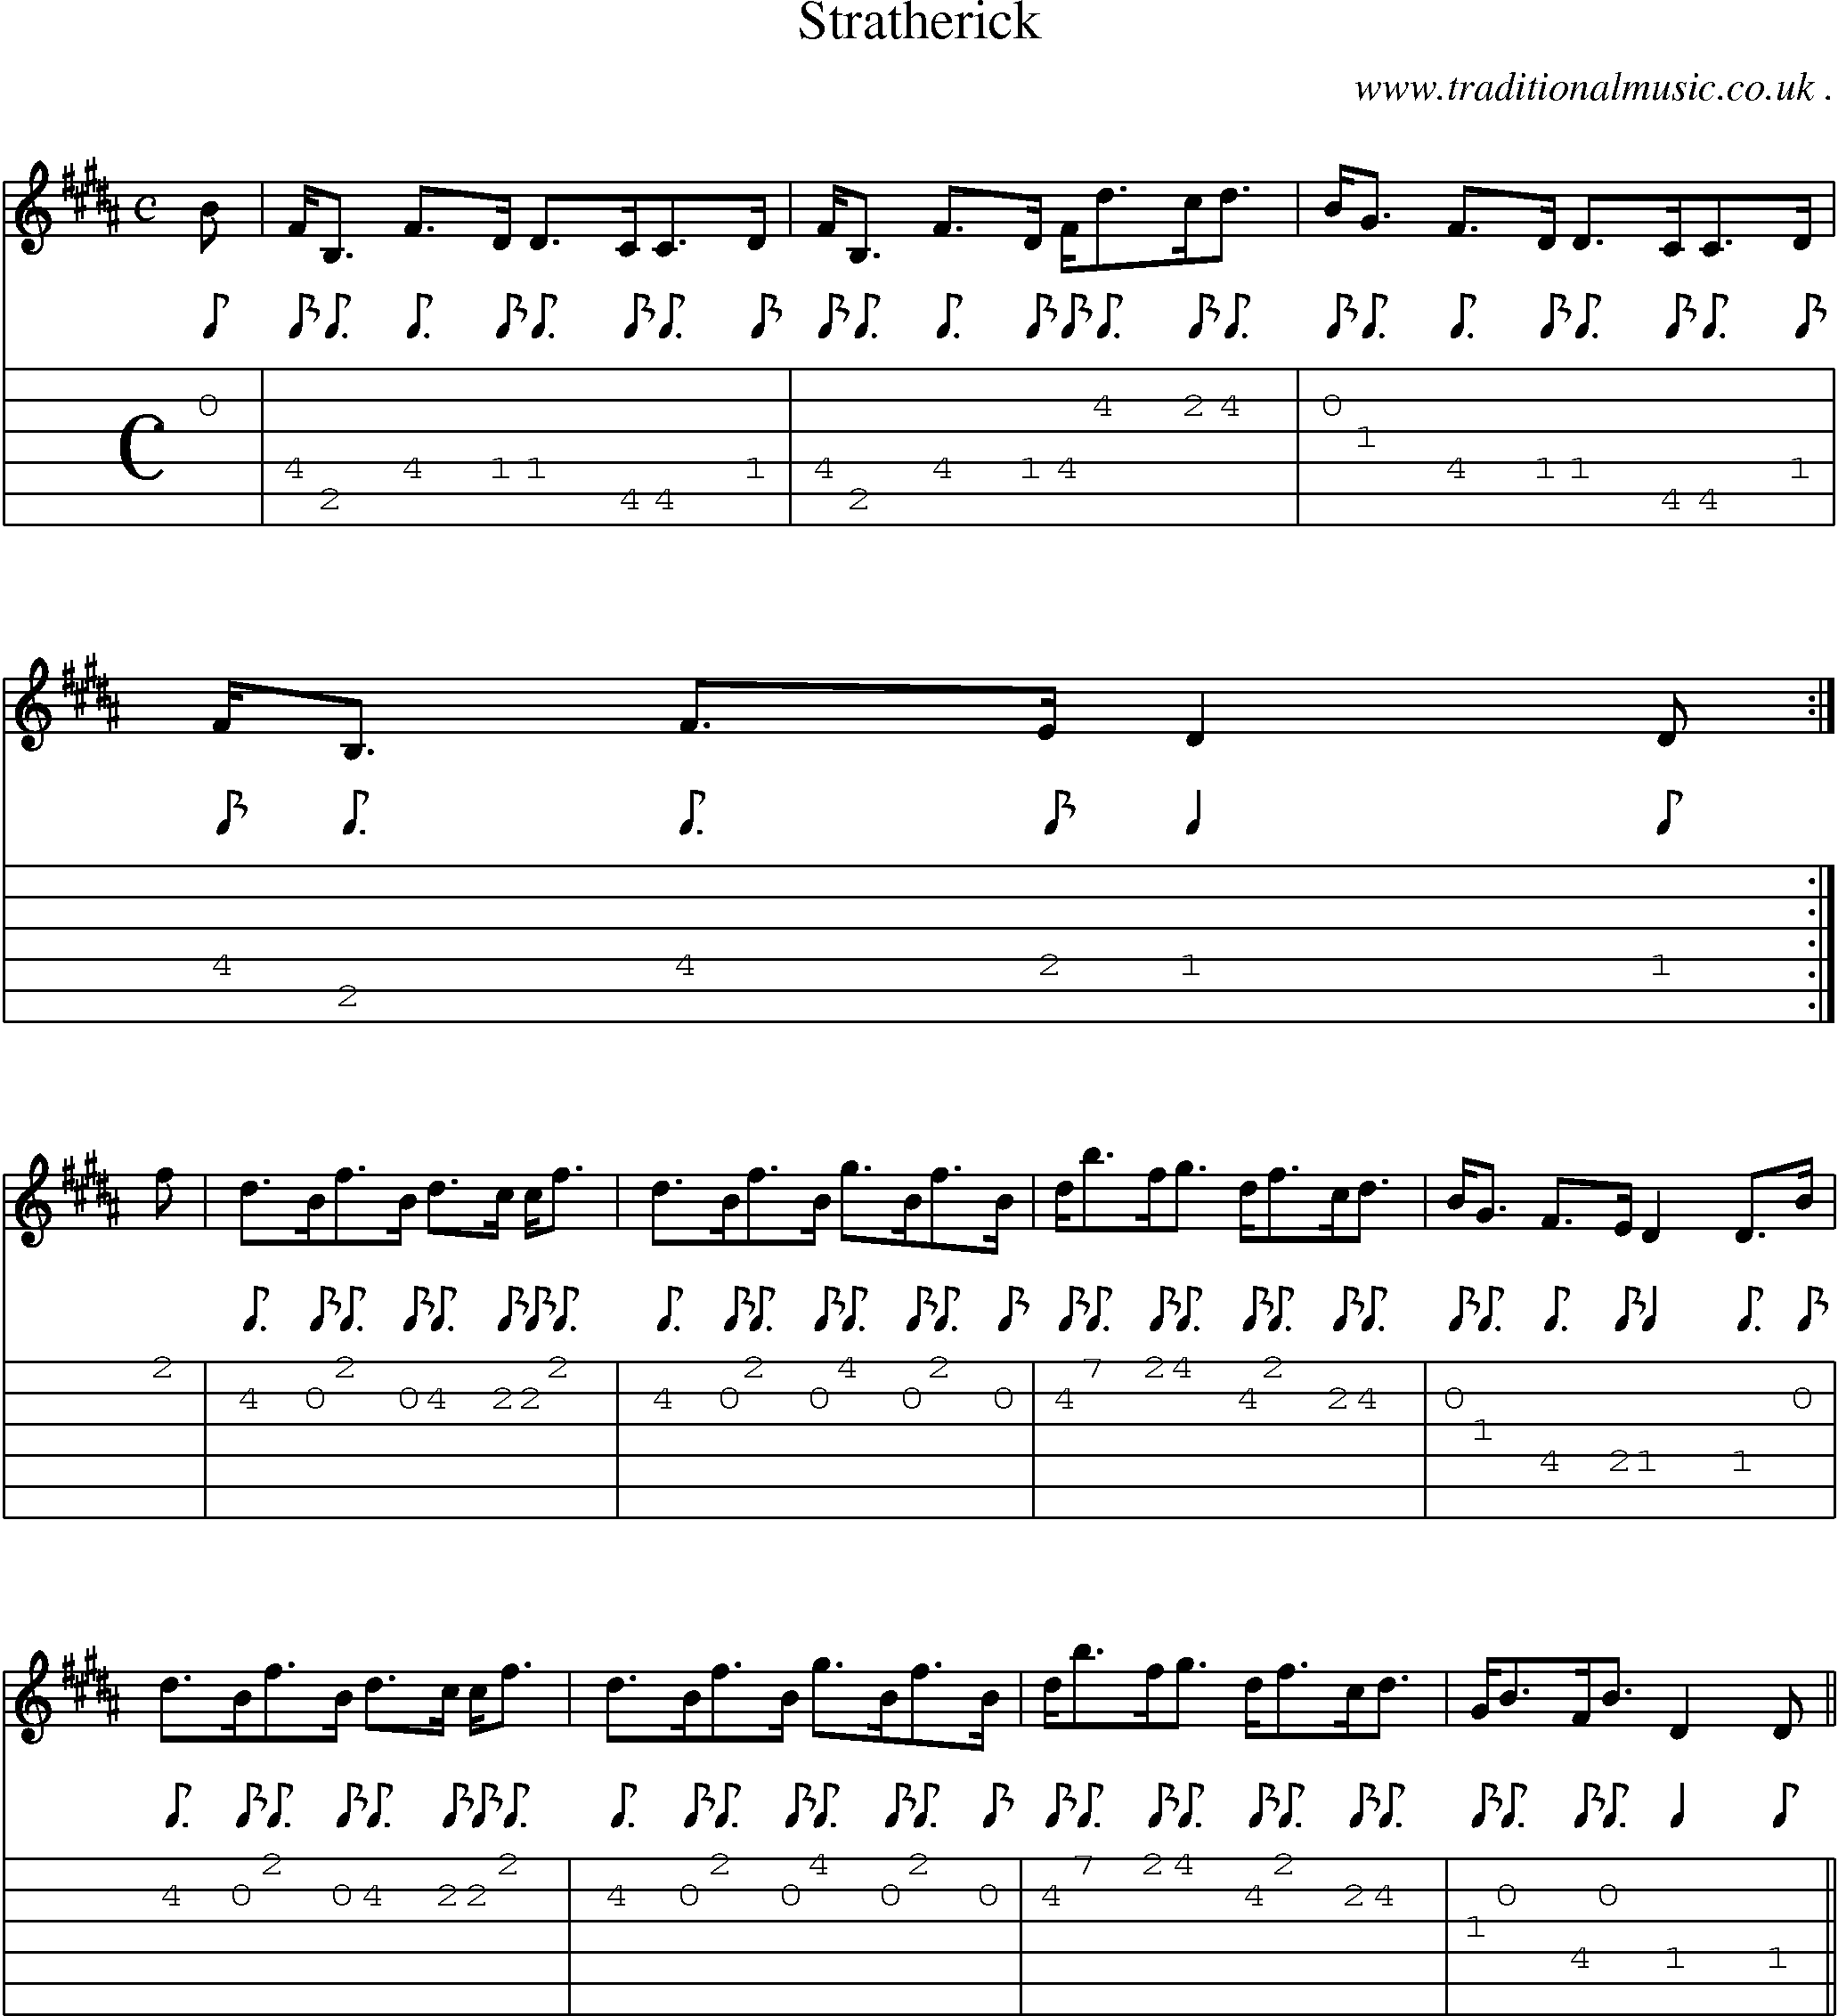 Sheet-music  score, Chords and Guitar Tabs for Stratherick